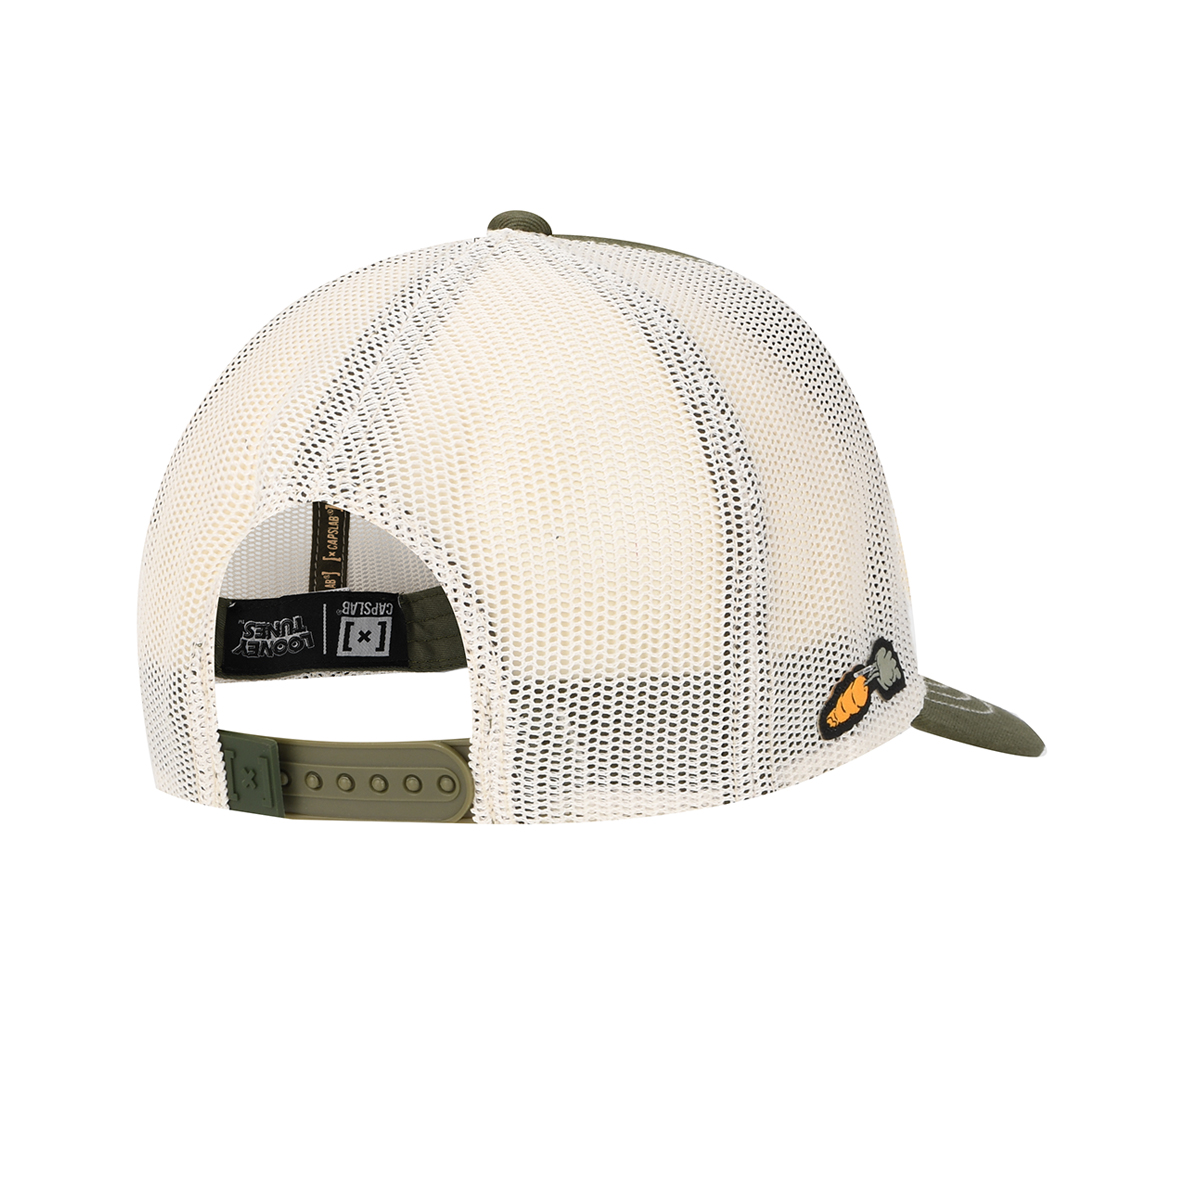 Gorra Capslab Looney Tunes Bugs Bunny,  image number null